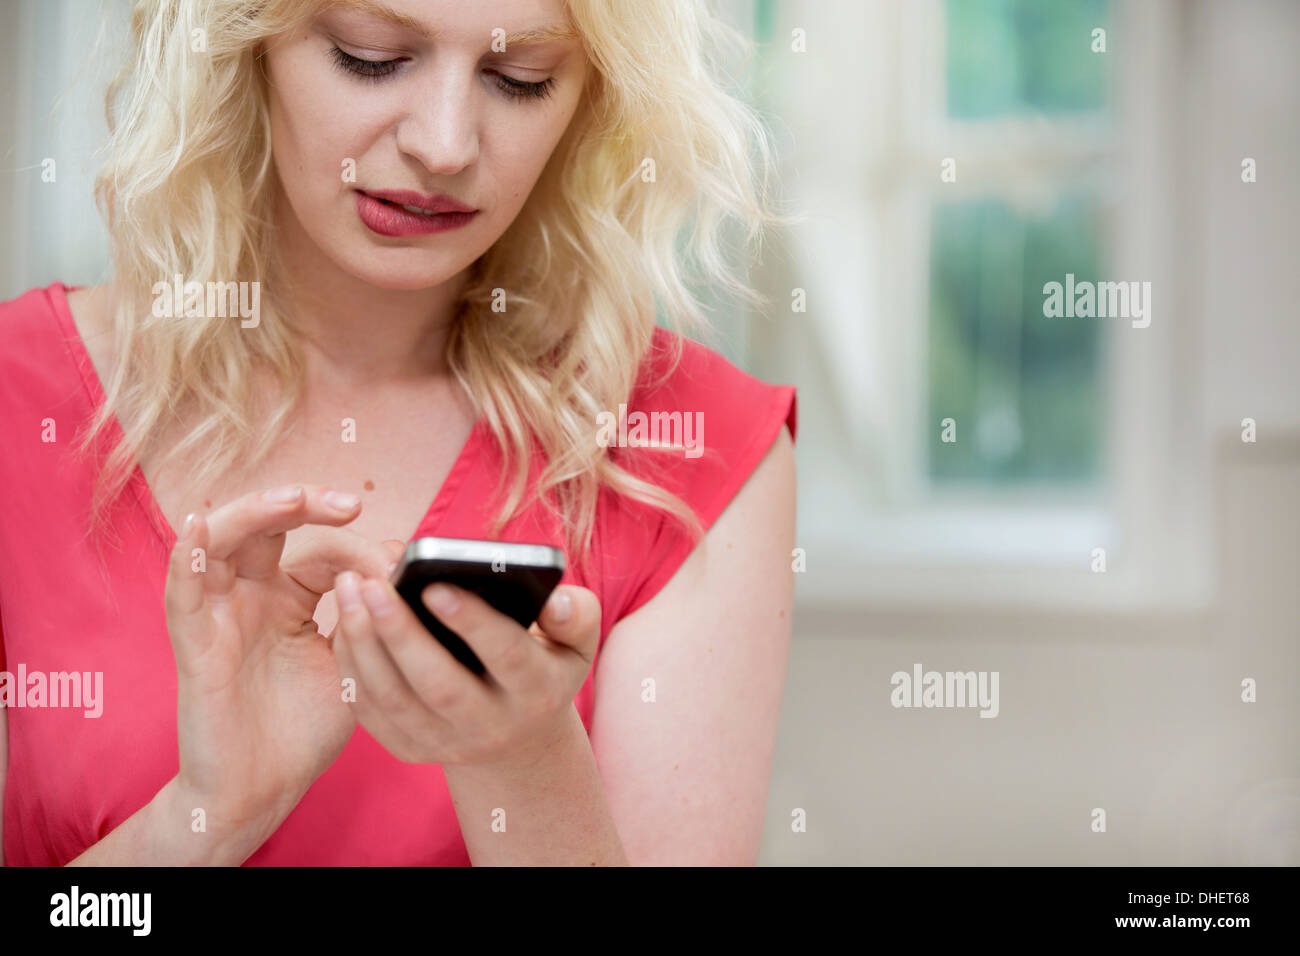 Young woman using smartphone, biting lip Banque D'Images